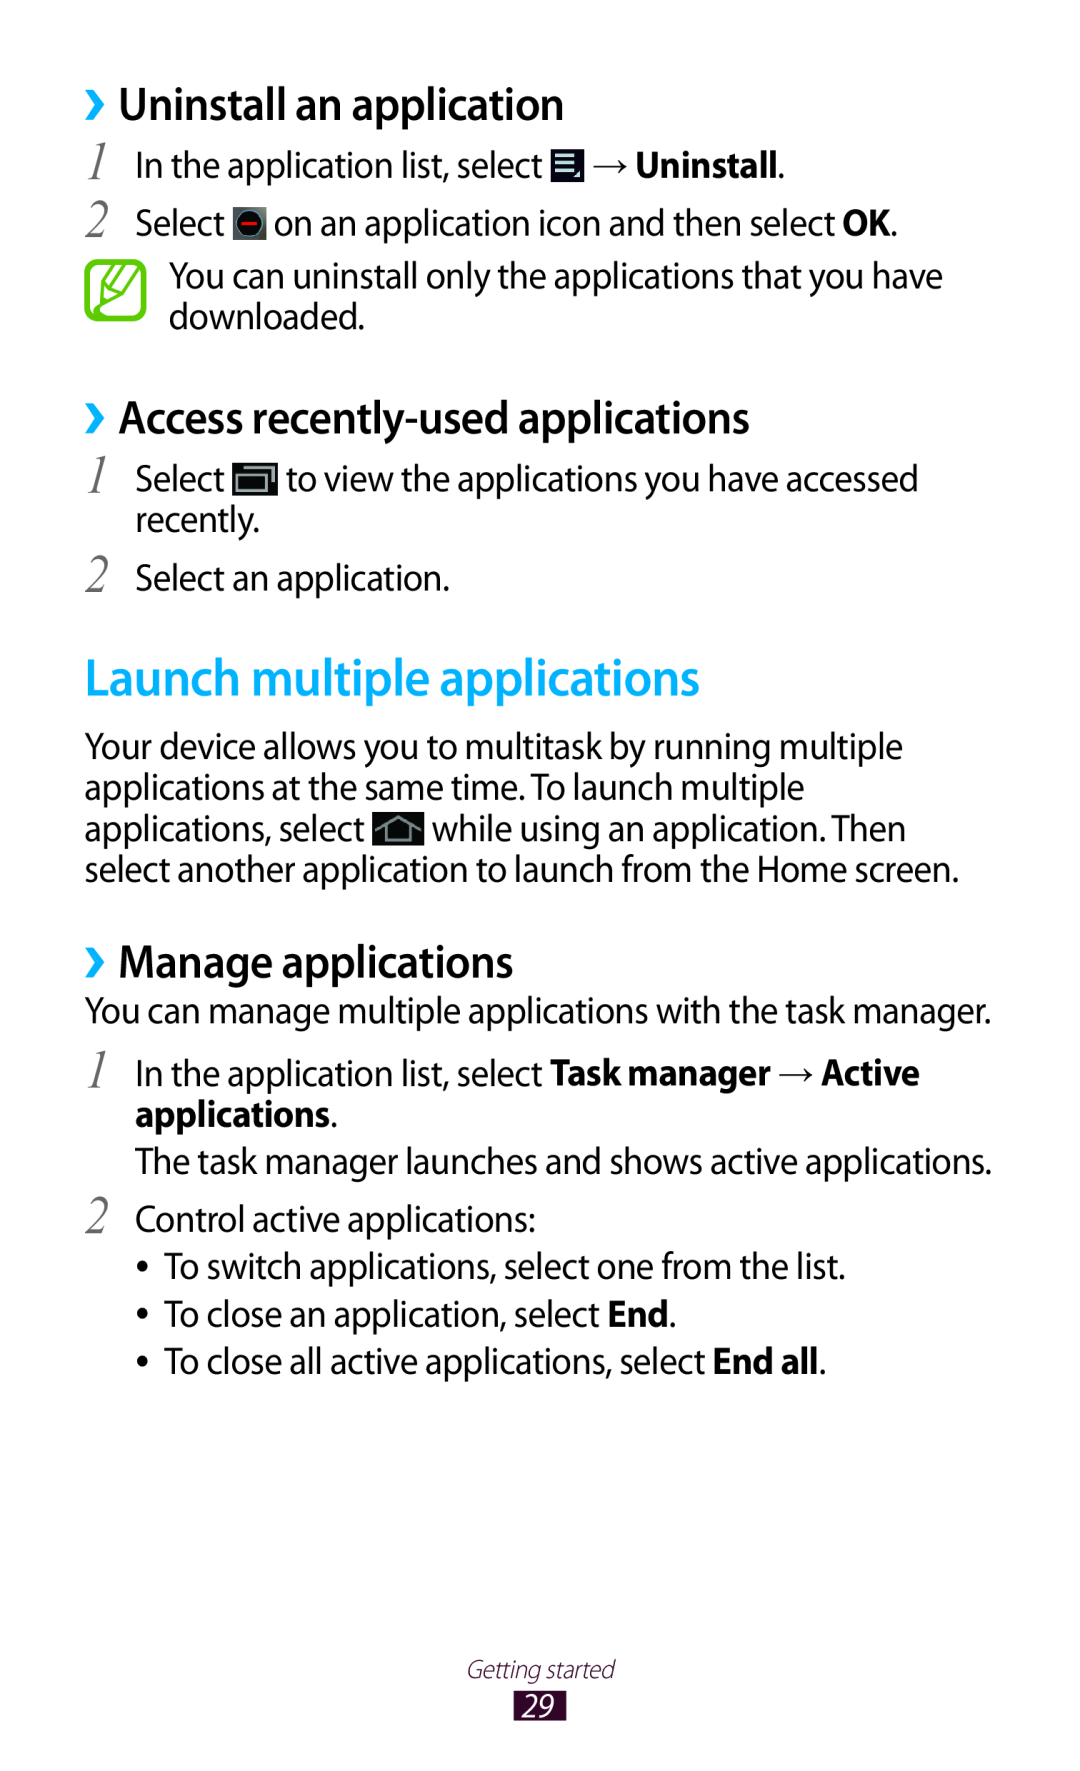 Samsung GT-P7500UWDFTM manual Launch multiple applications, ››Uninstall an application, ››Access recently-used applications 